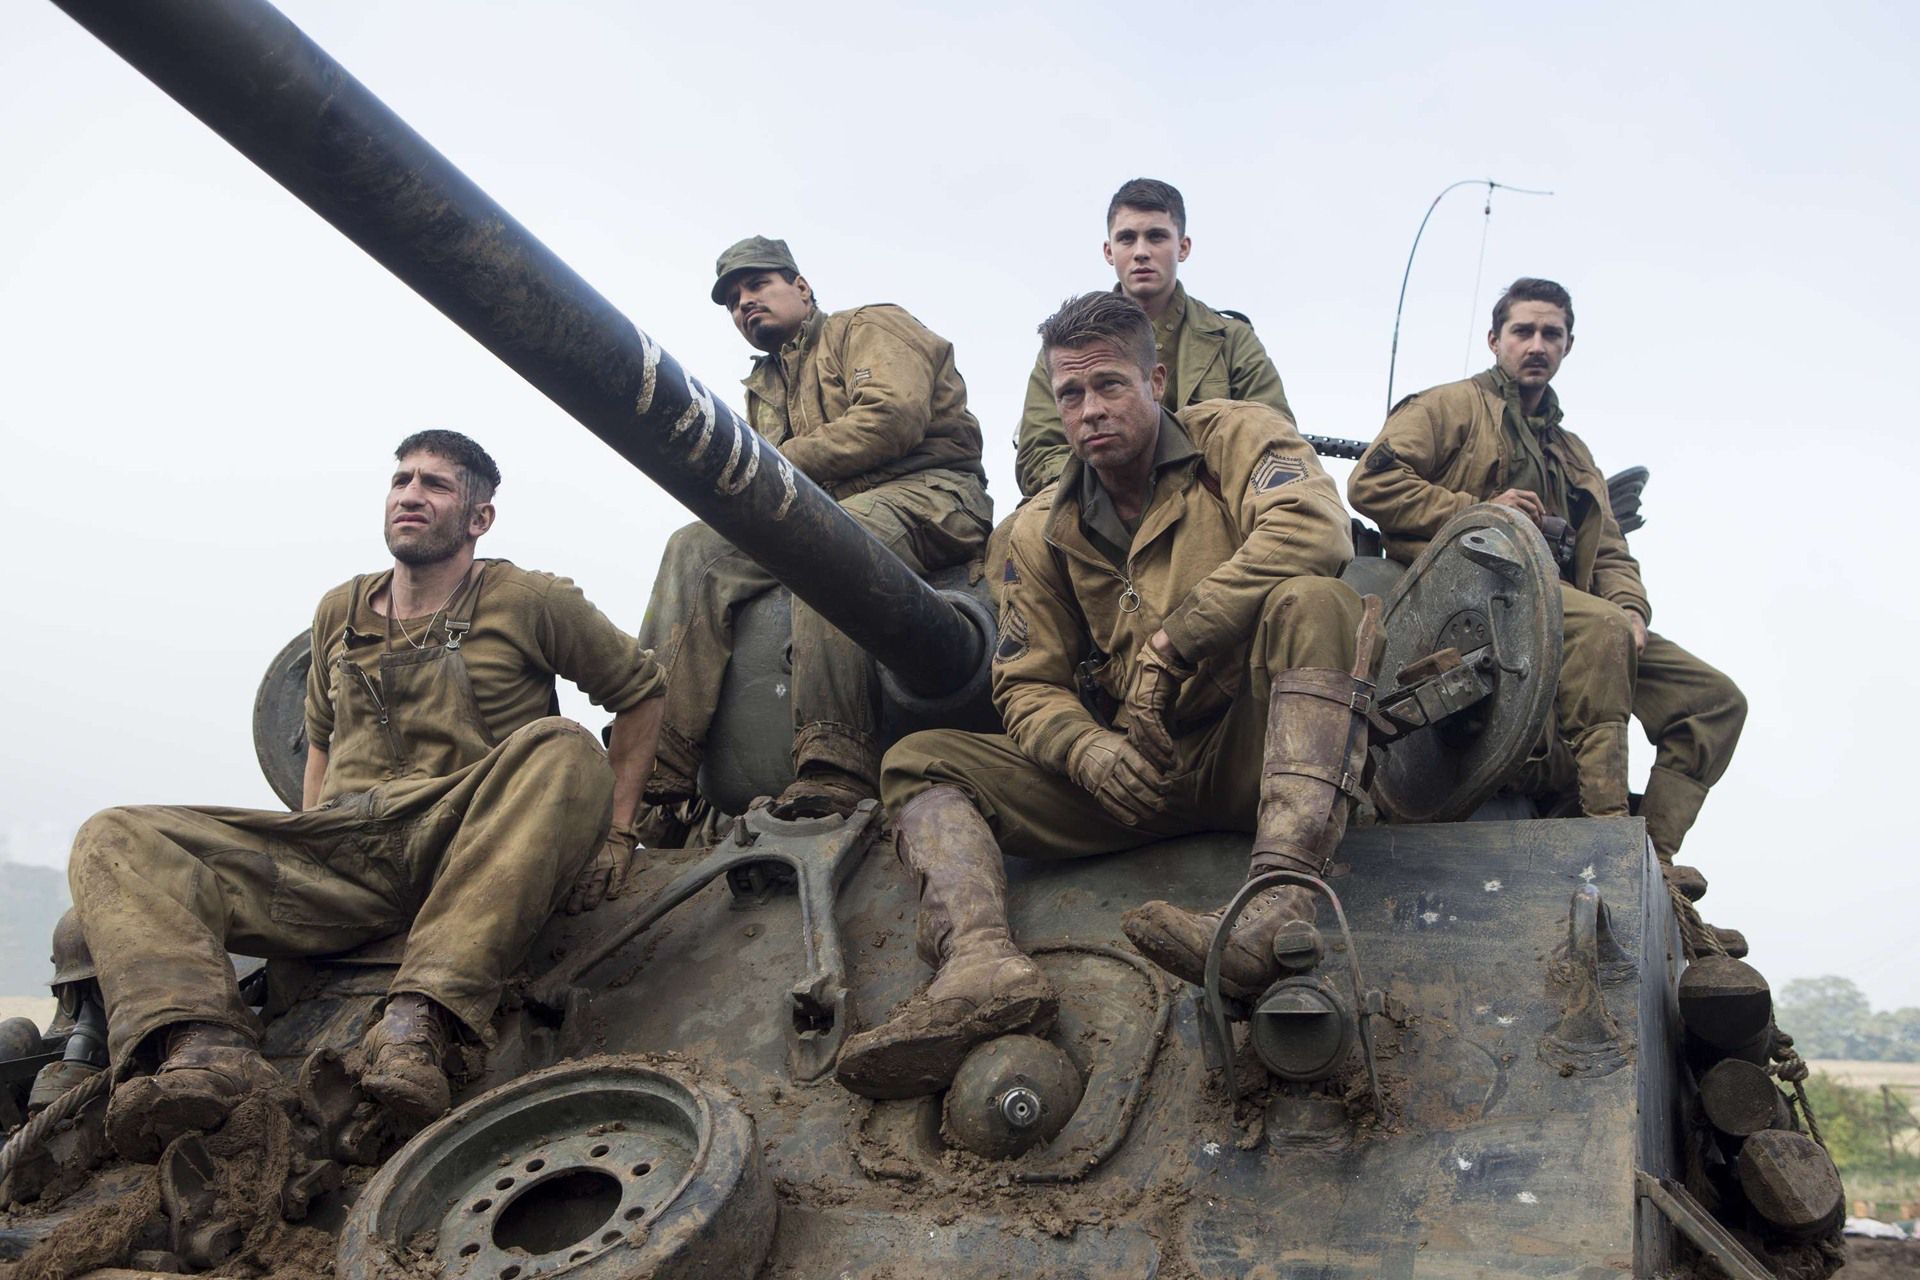 fury movie download in hd